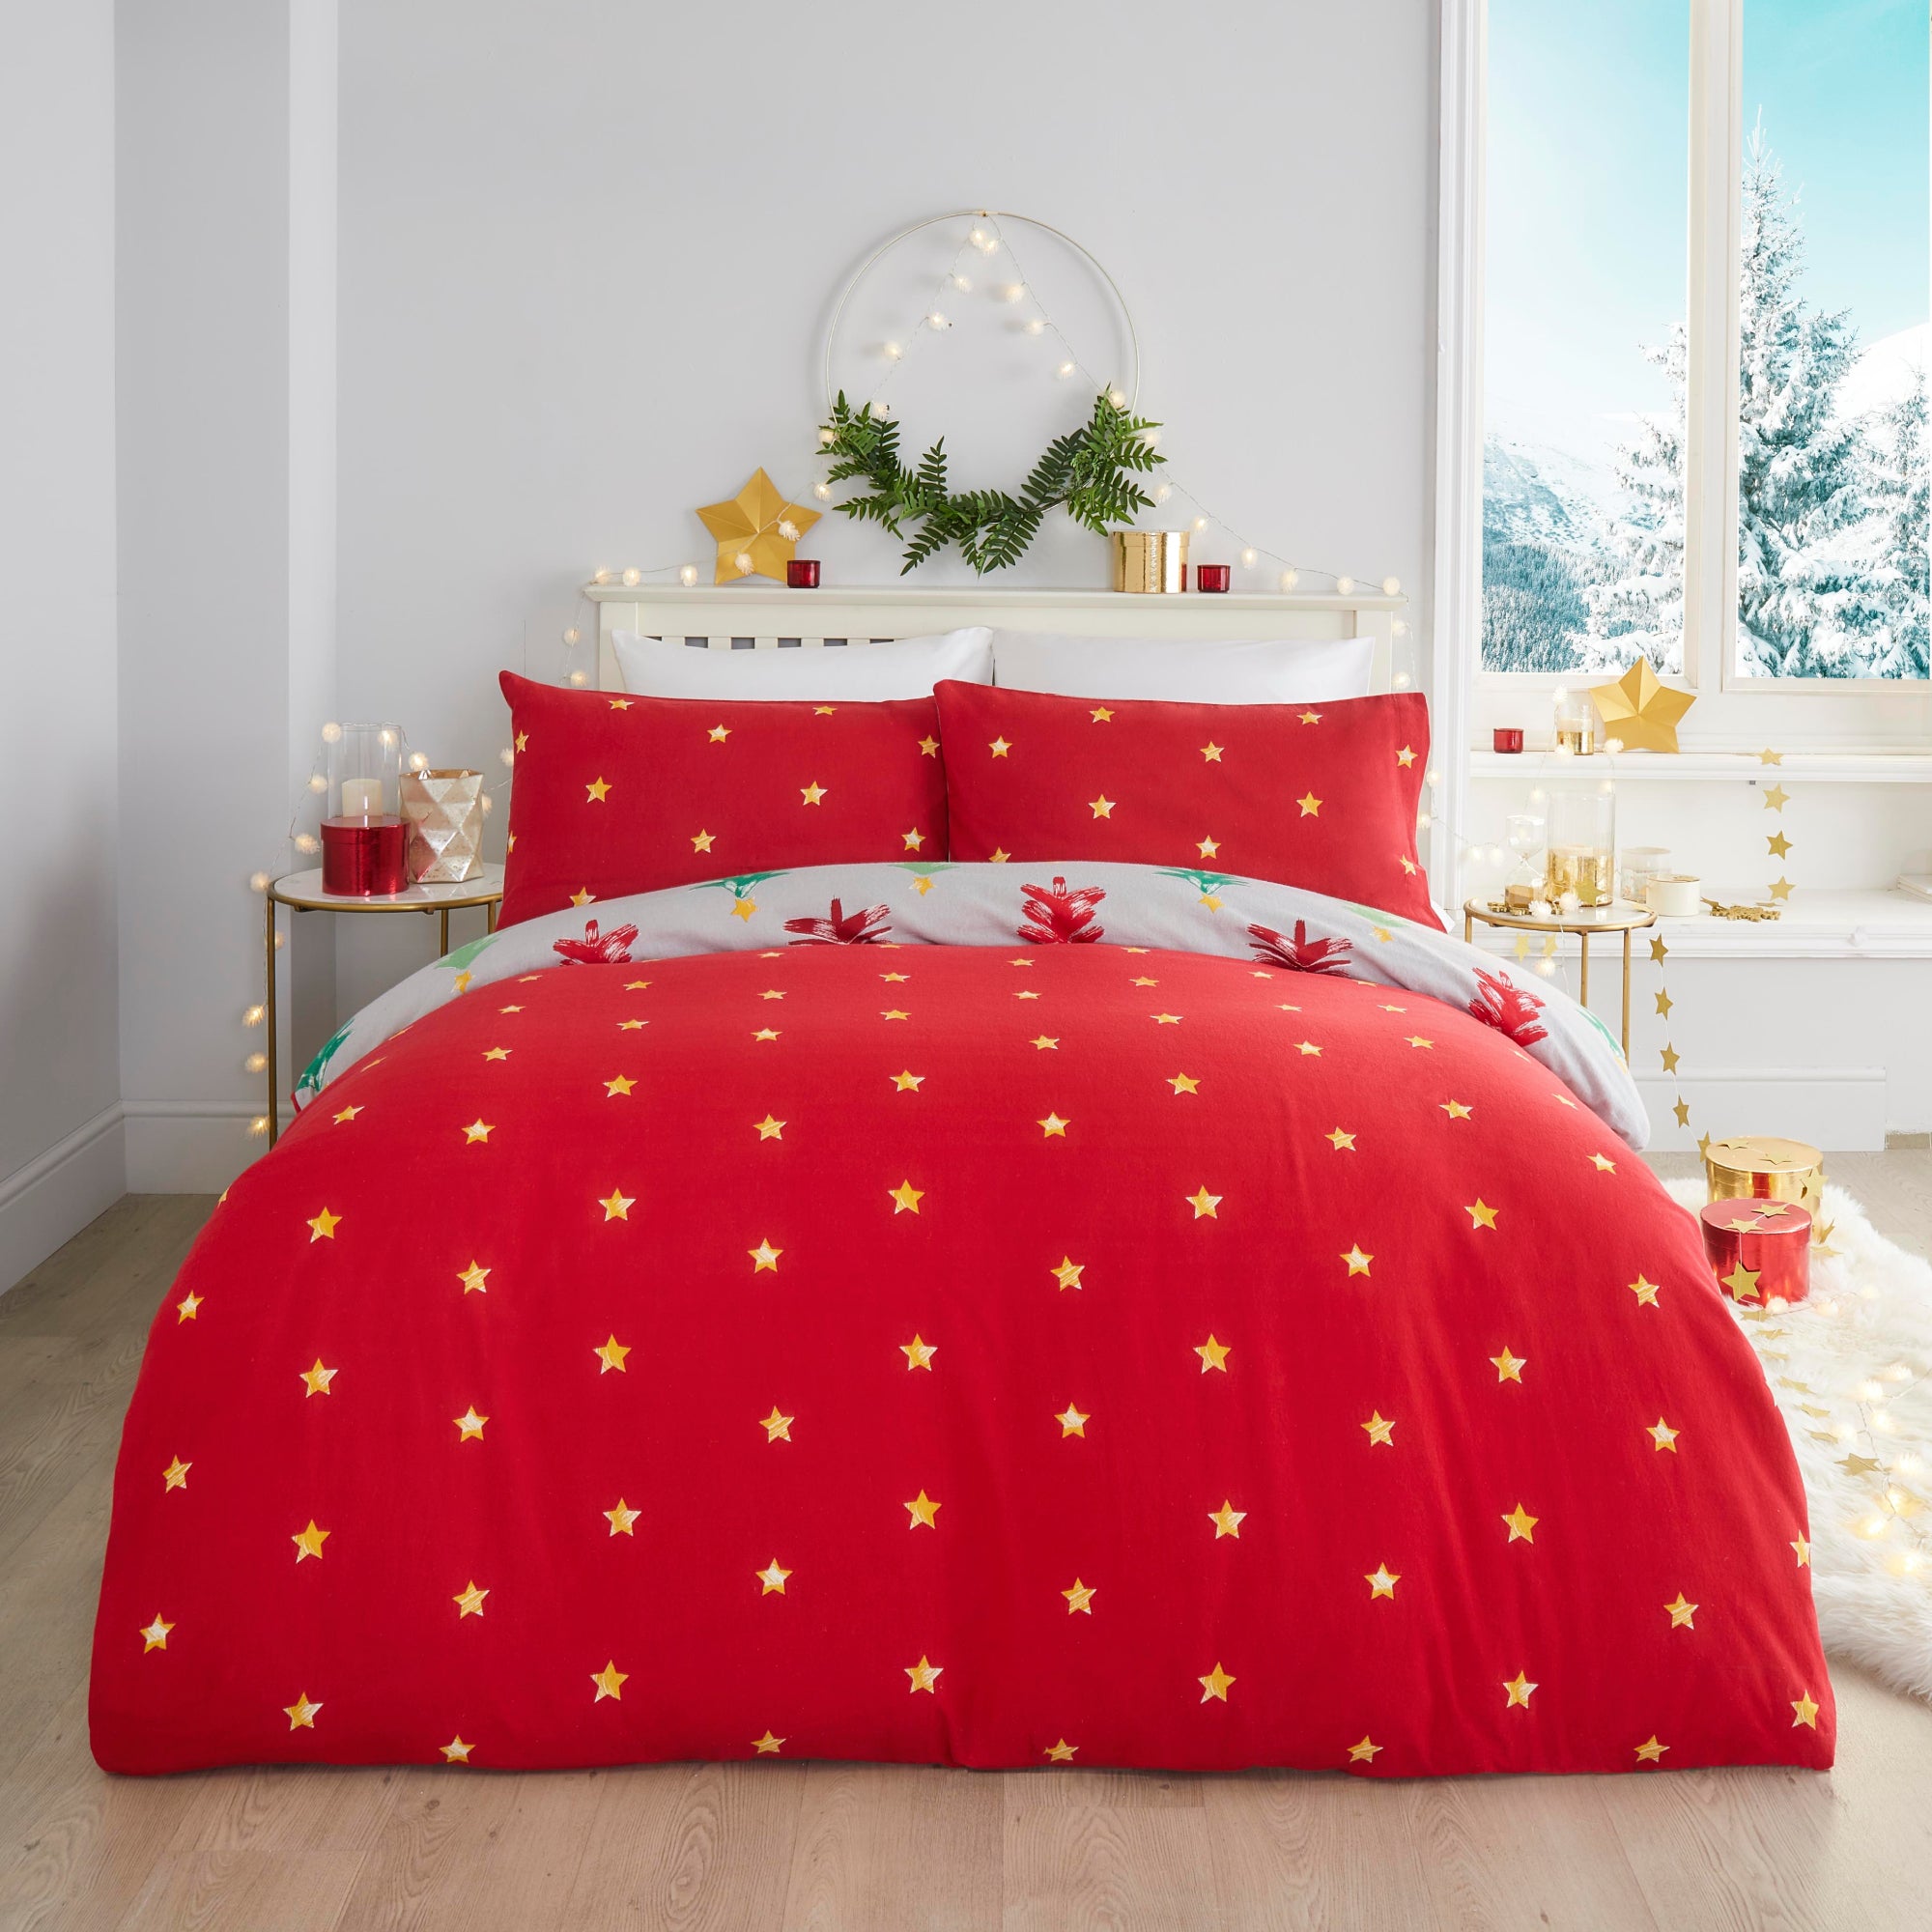 Duvet Cover Set Festive Trees by Fusion Christmas in Grey